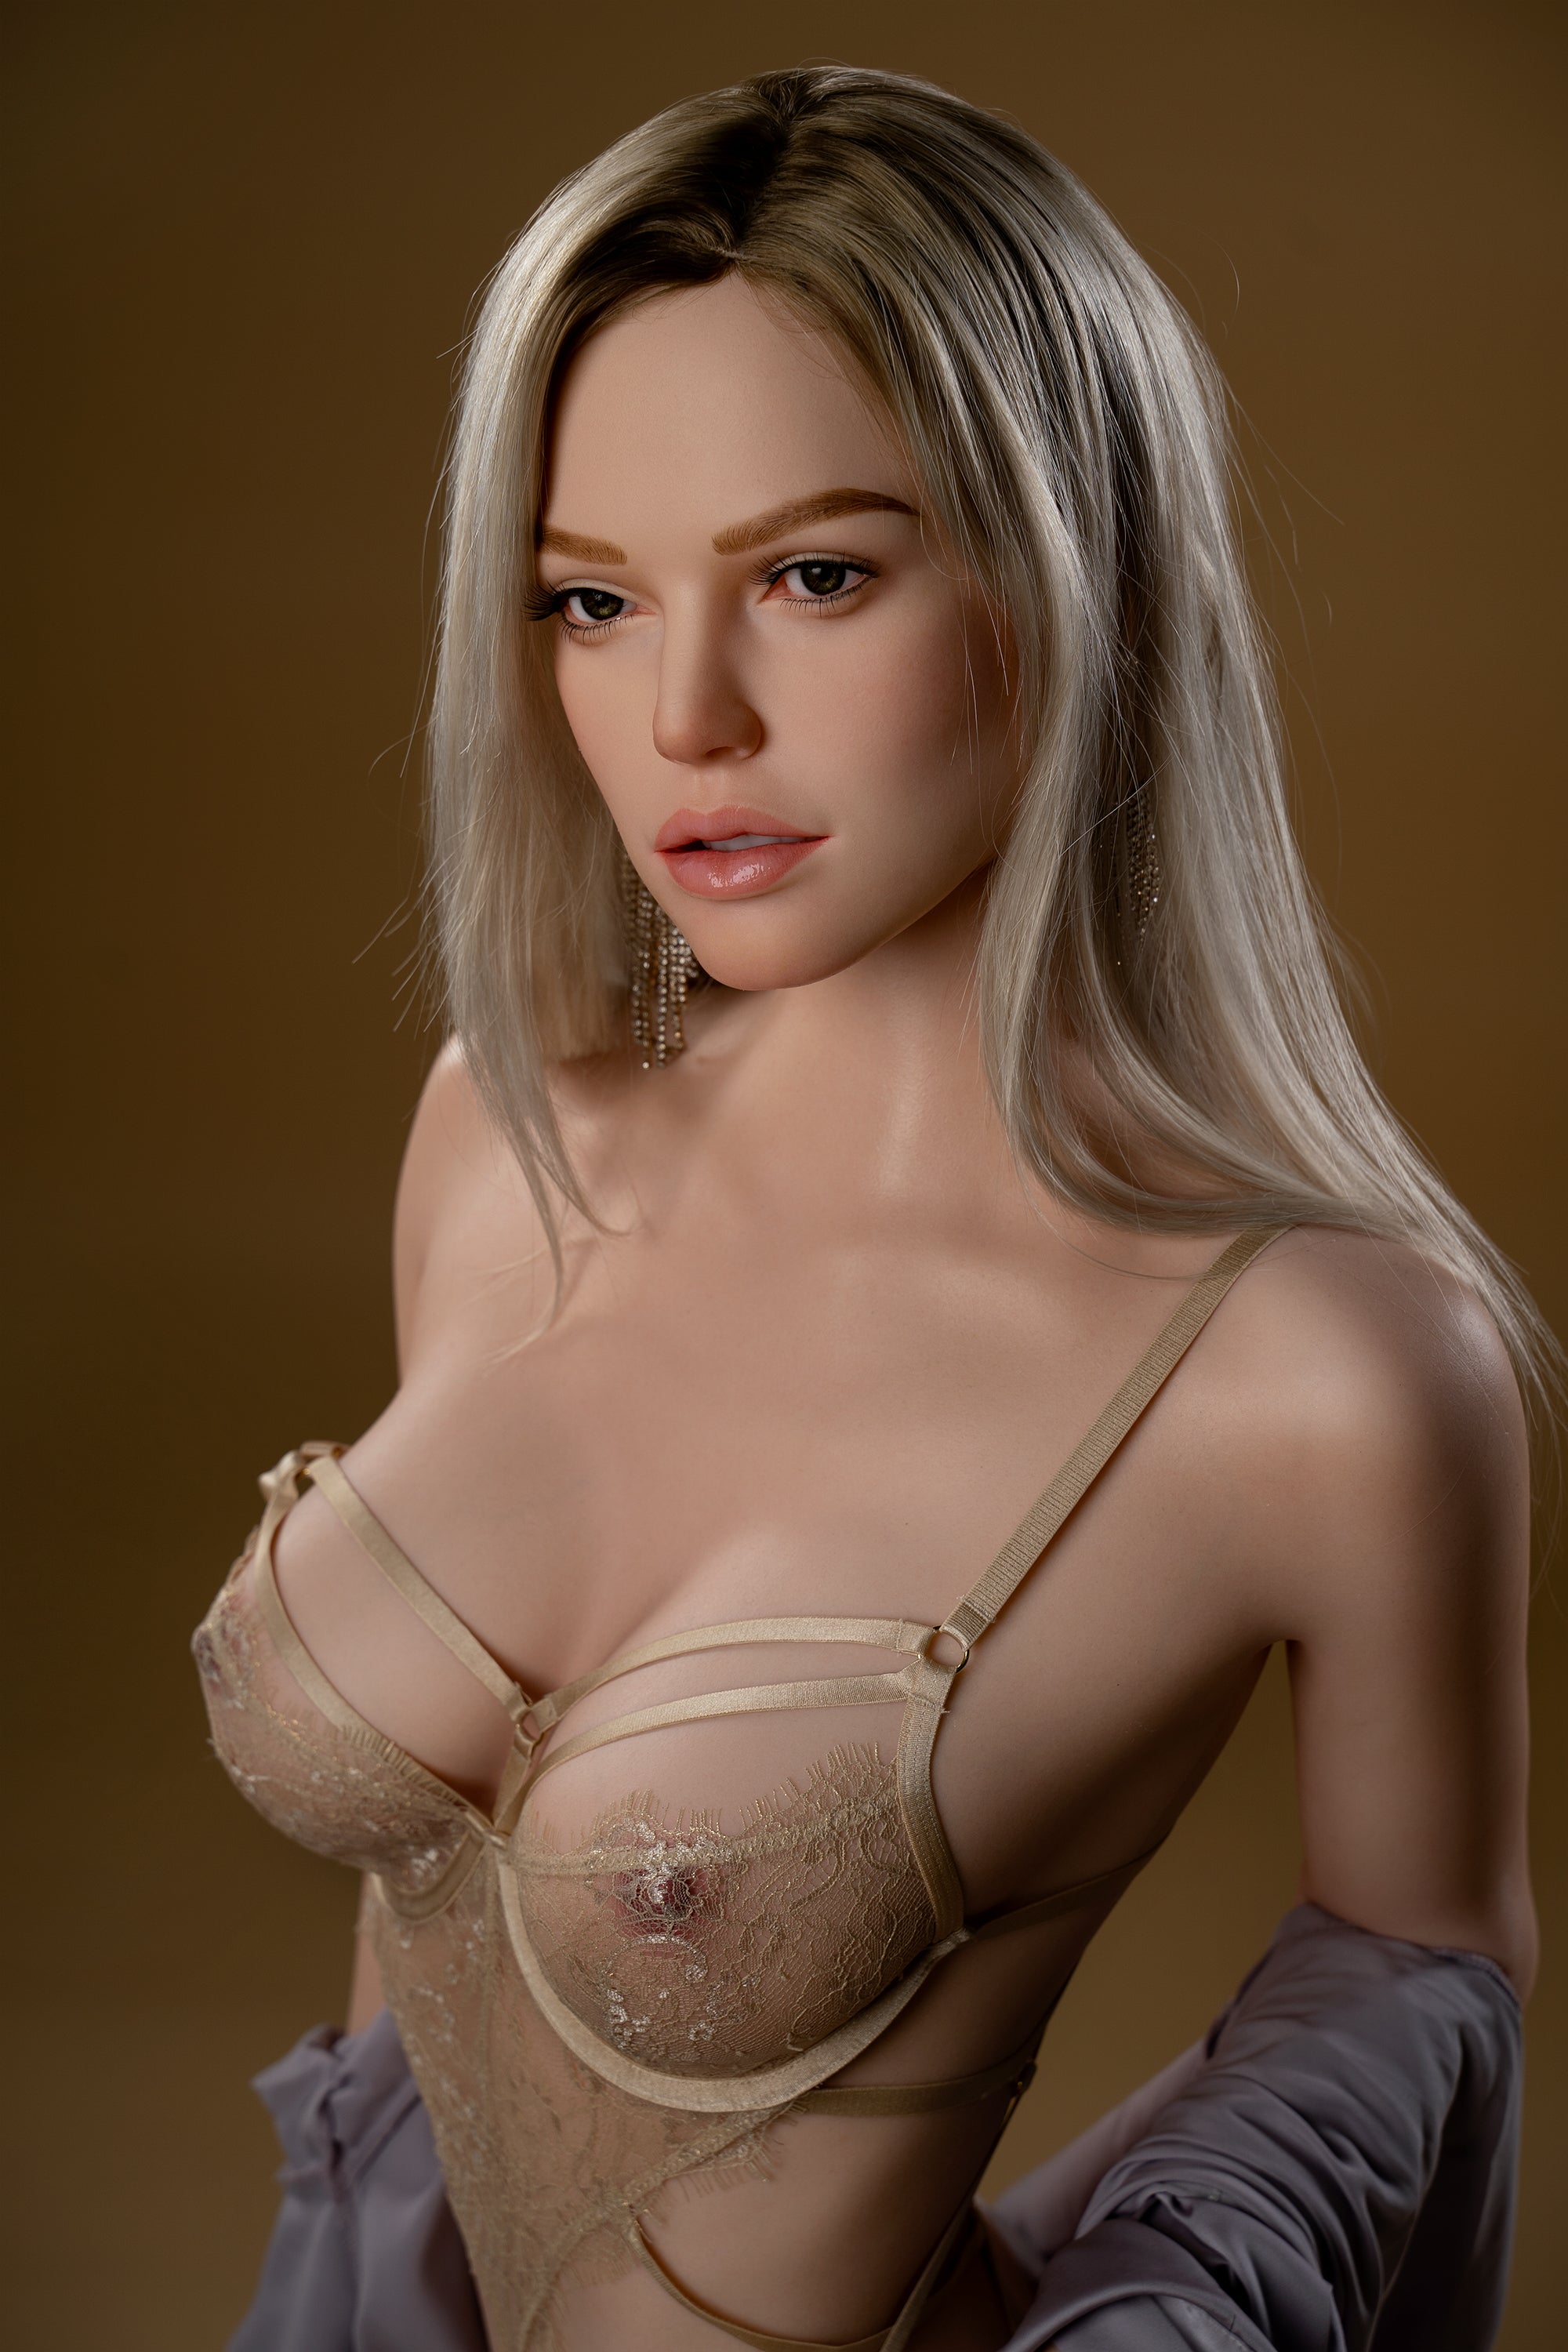 Zelex Doll Inspiration 170 cm C Silicone - Adriana | Buy Sex Dolls at DOLLS ACTUALLY